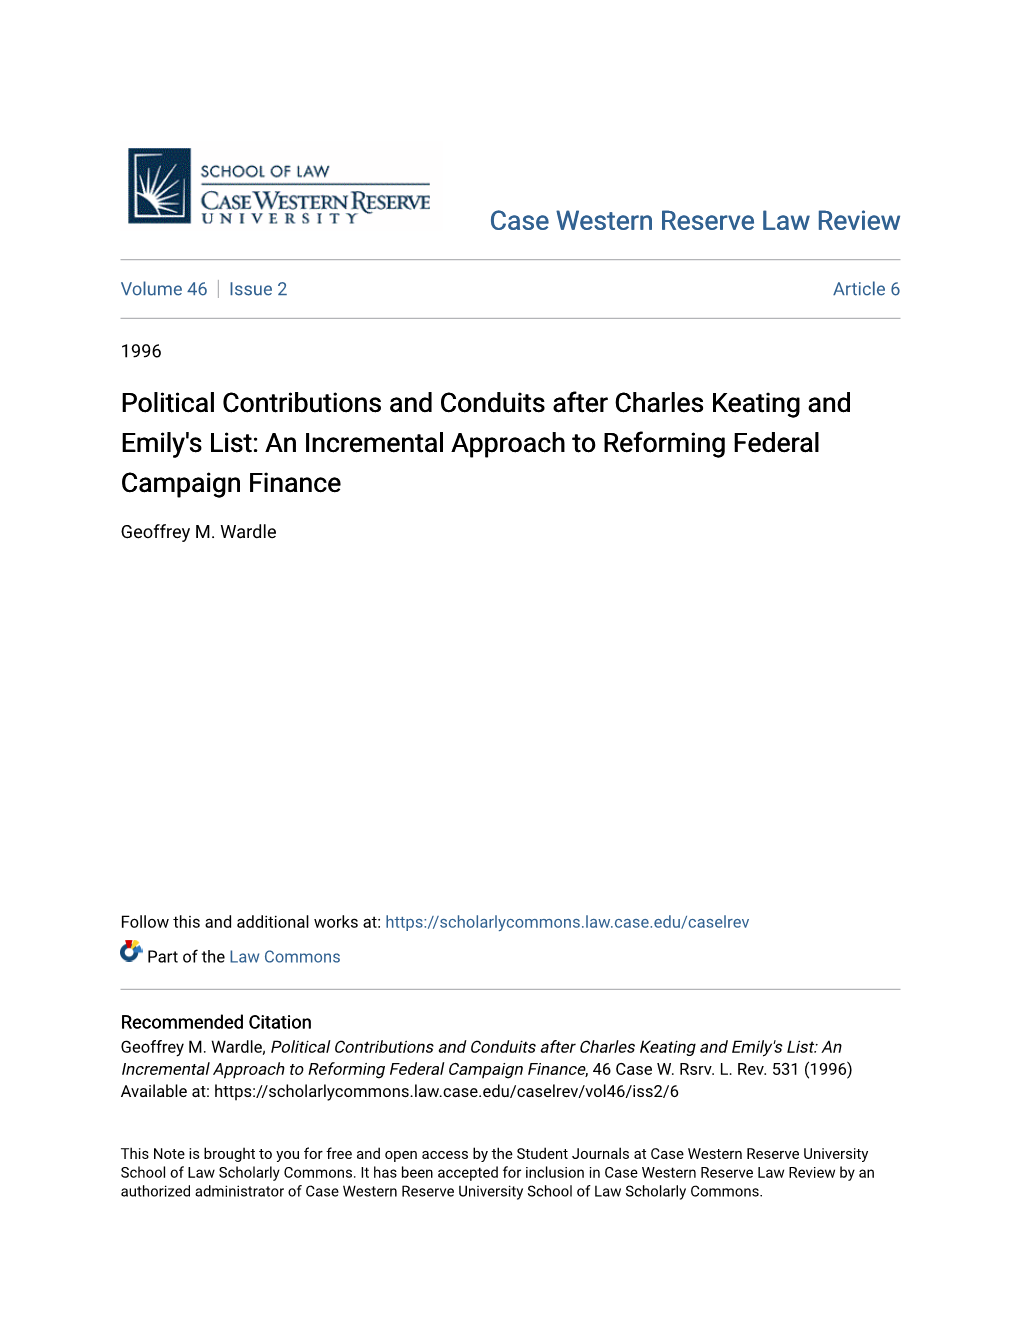 Political Contributions and Conduits After Charles Keating and Emily's List: an Incremental Approach to Reforming Federal Campaign Finance